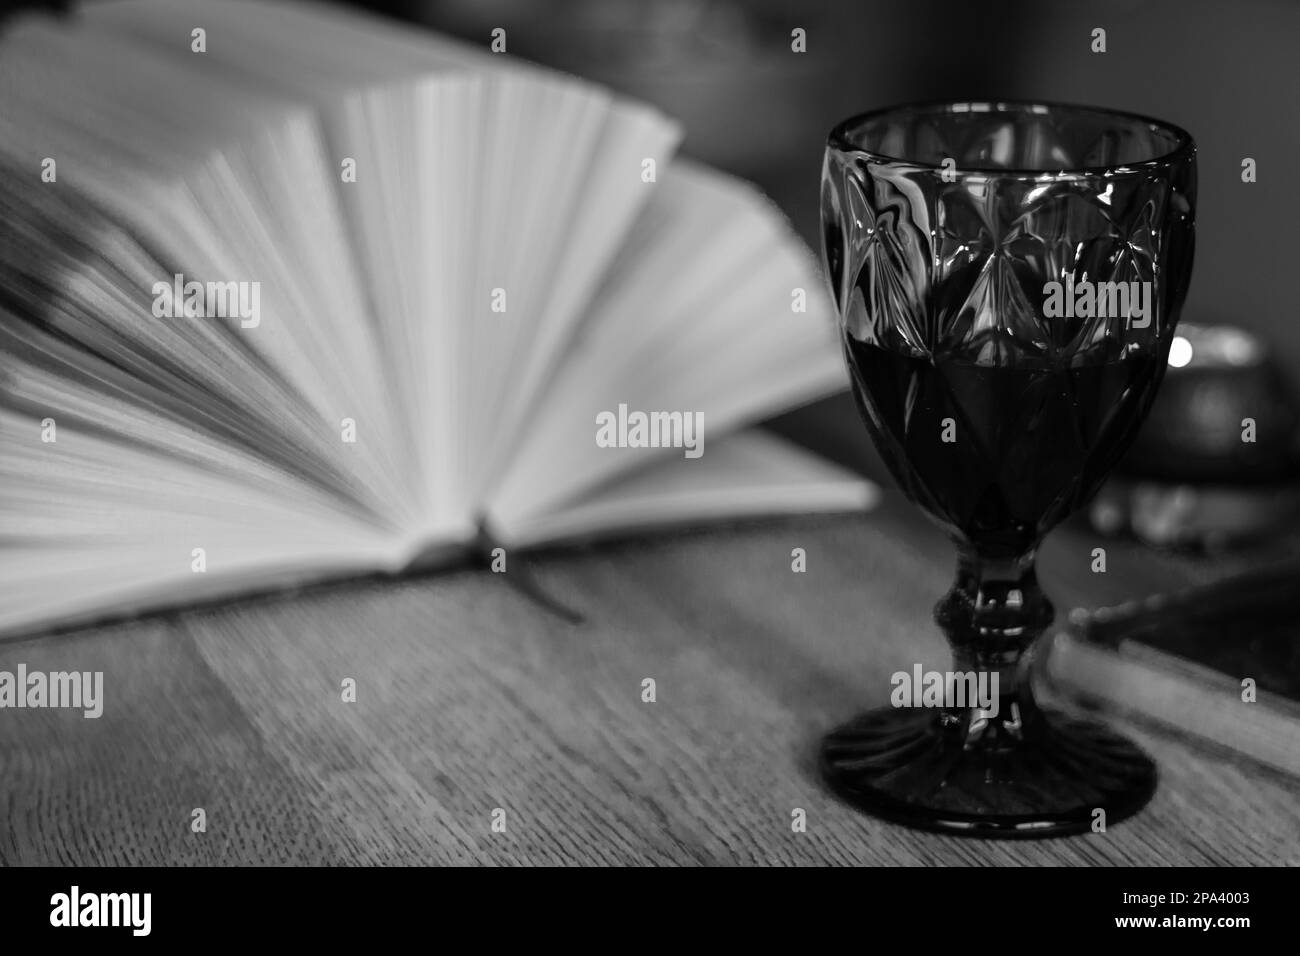 Open book with glass of wine, black and white. Open book with wineglass. Education concept. Reading books. Literature background. Wisdom and knowledge Stock Photo